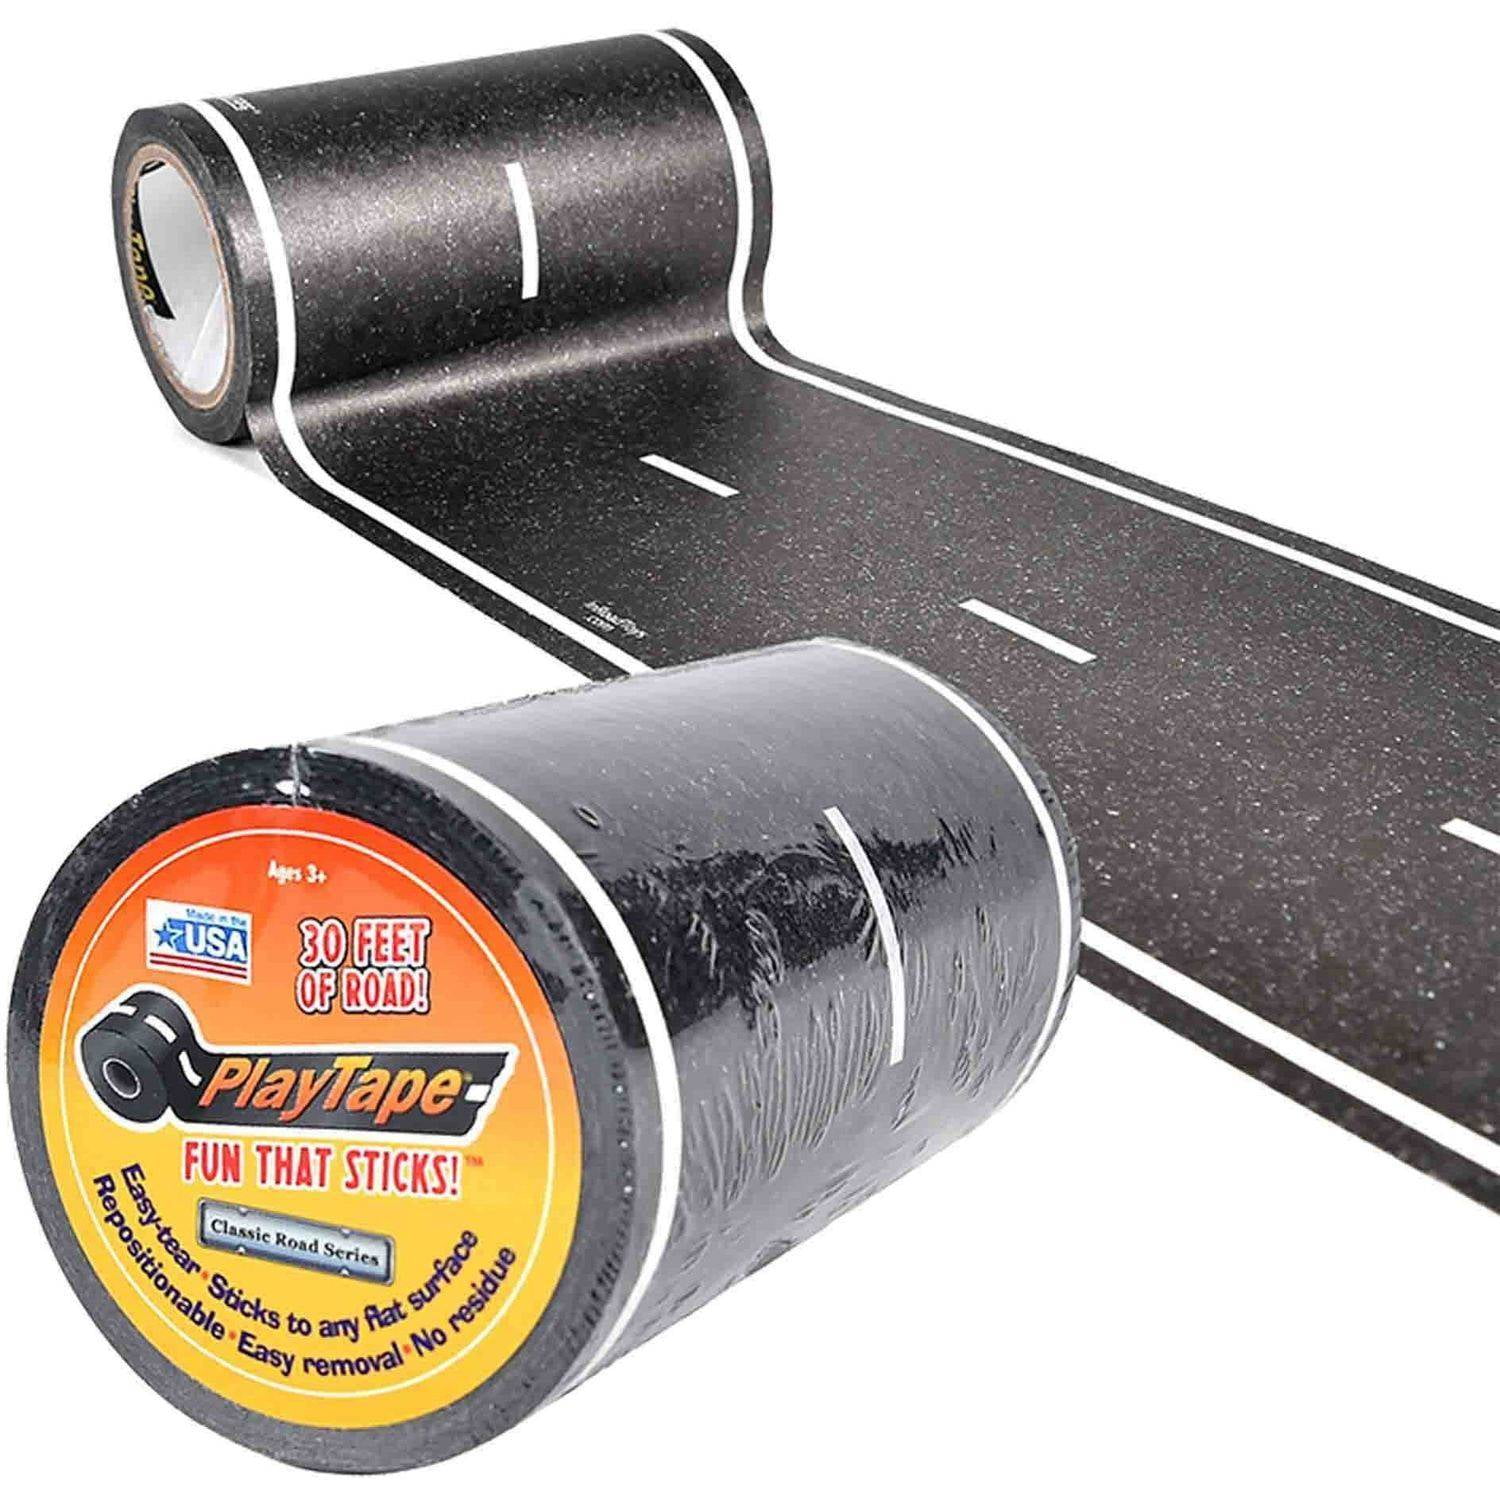 InRoad Toys PlayTape Road Tape for Toy Cars - Sticks to Flat Surfaces, No  Residue; 30 ft. x 4 in. Black Road